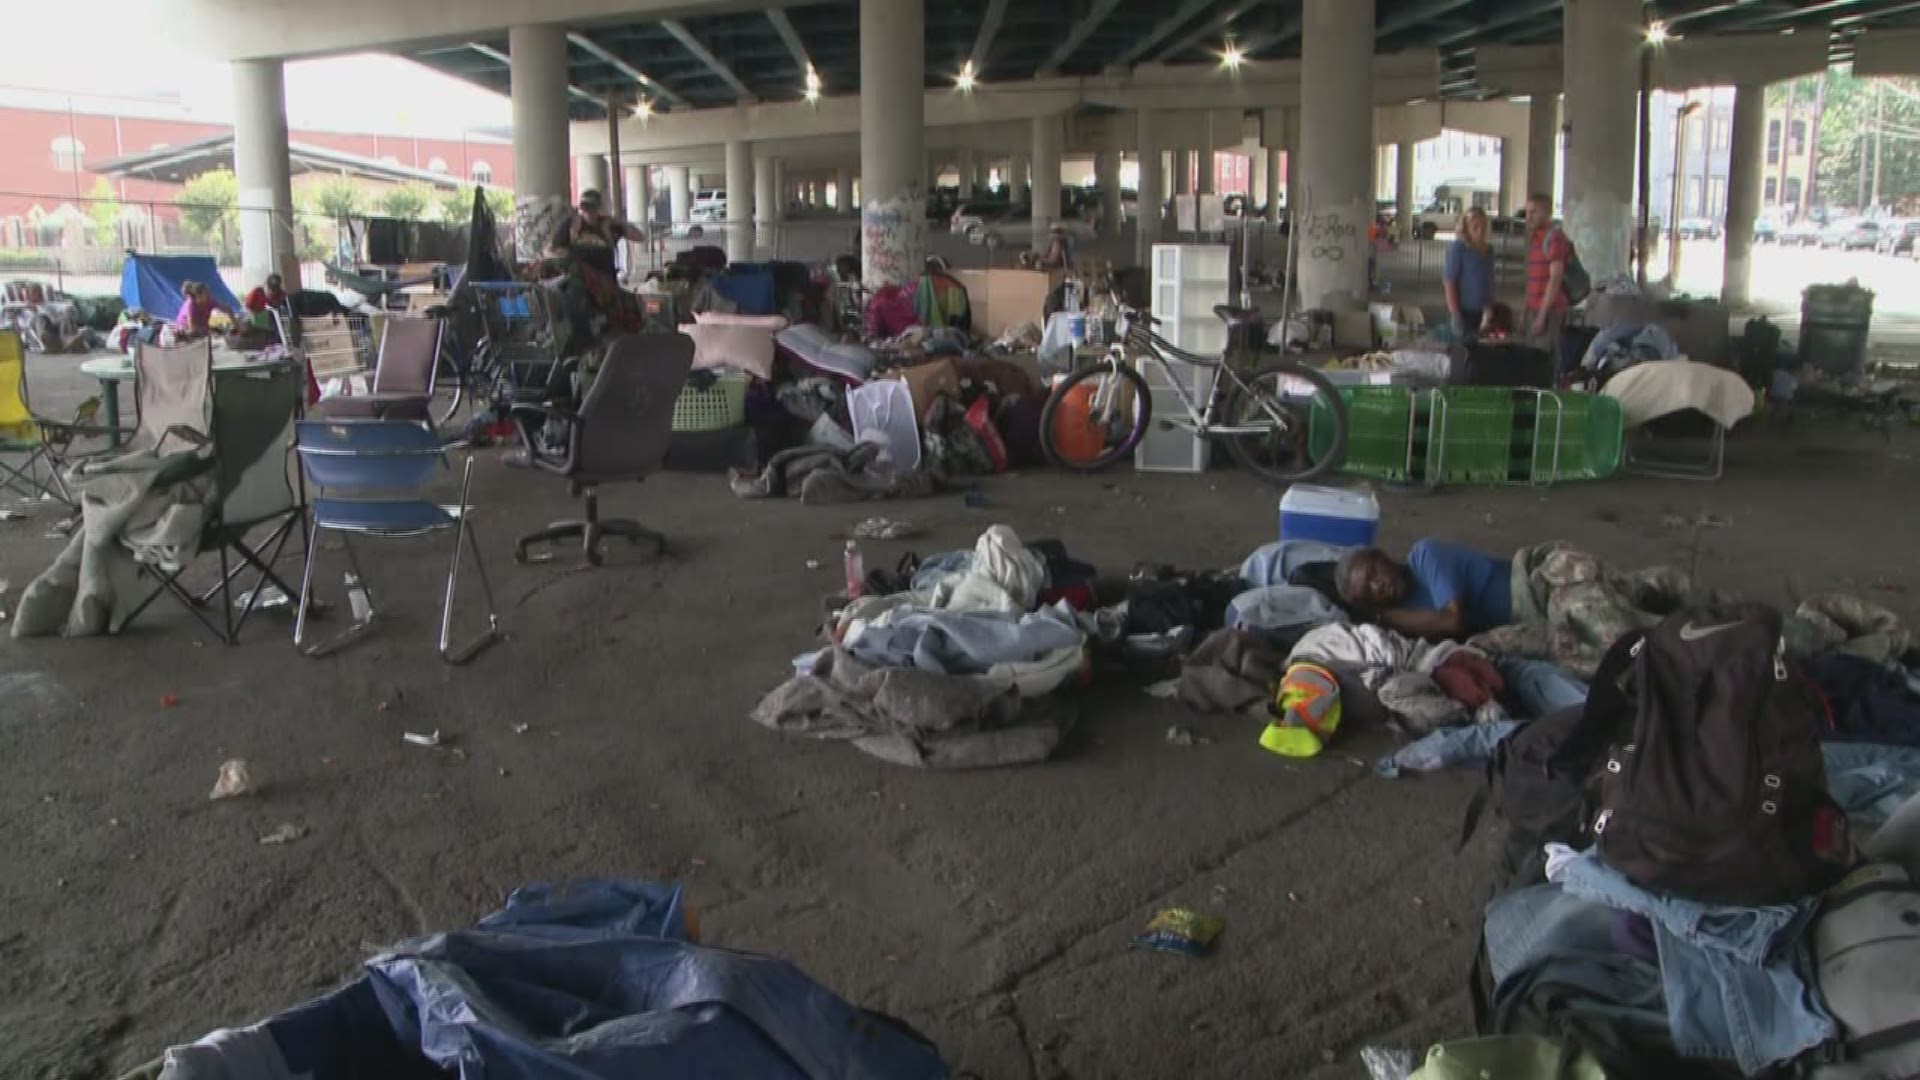 Soon Knoxville's homeless can gather in a designated day-space set aside by the city, under the I-40 bridge at Broadway near downtown Knoxville. We're answering your questions about the new project and the homeless population.